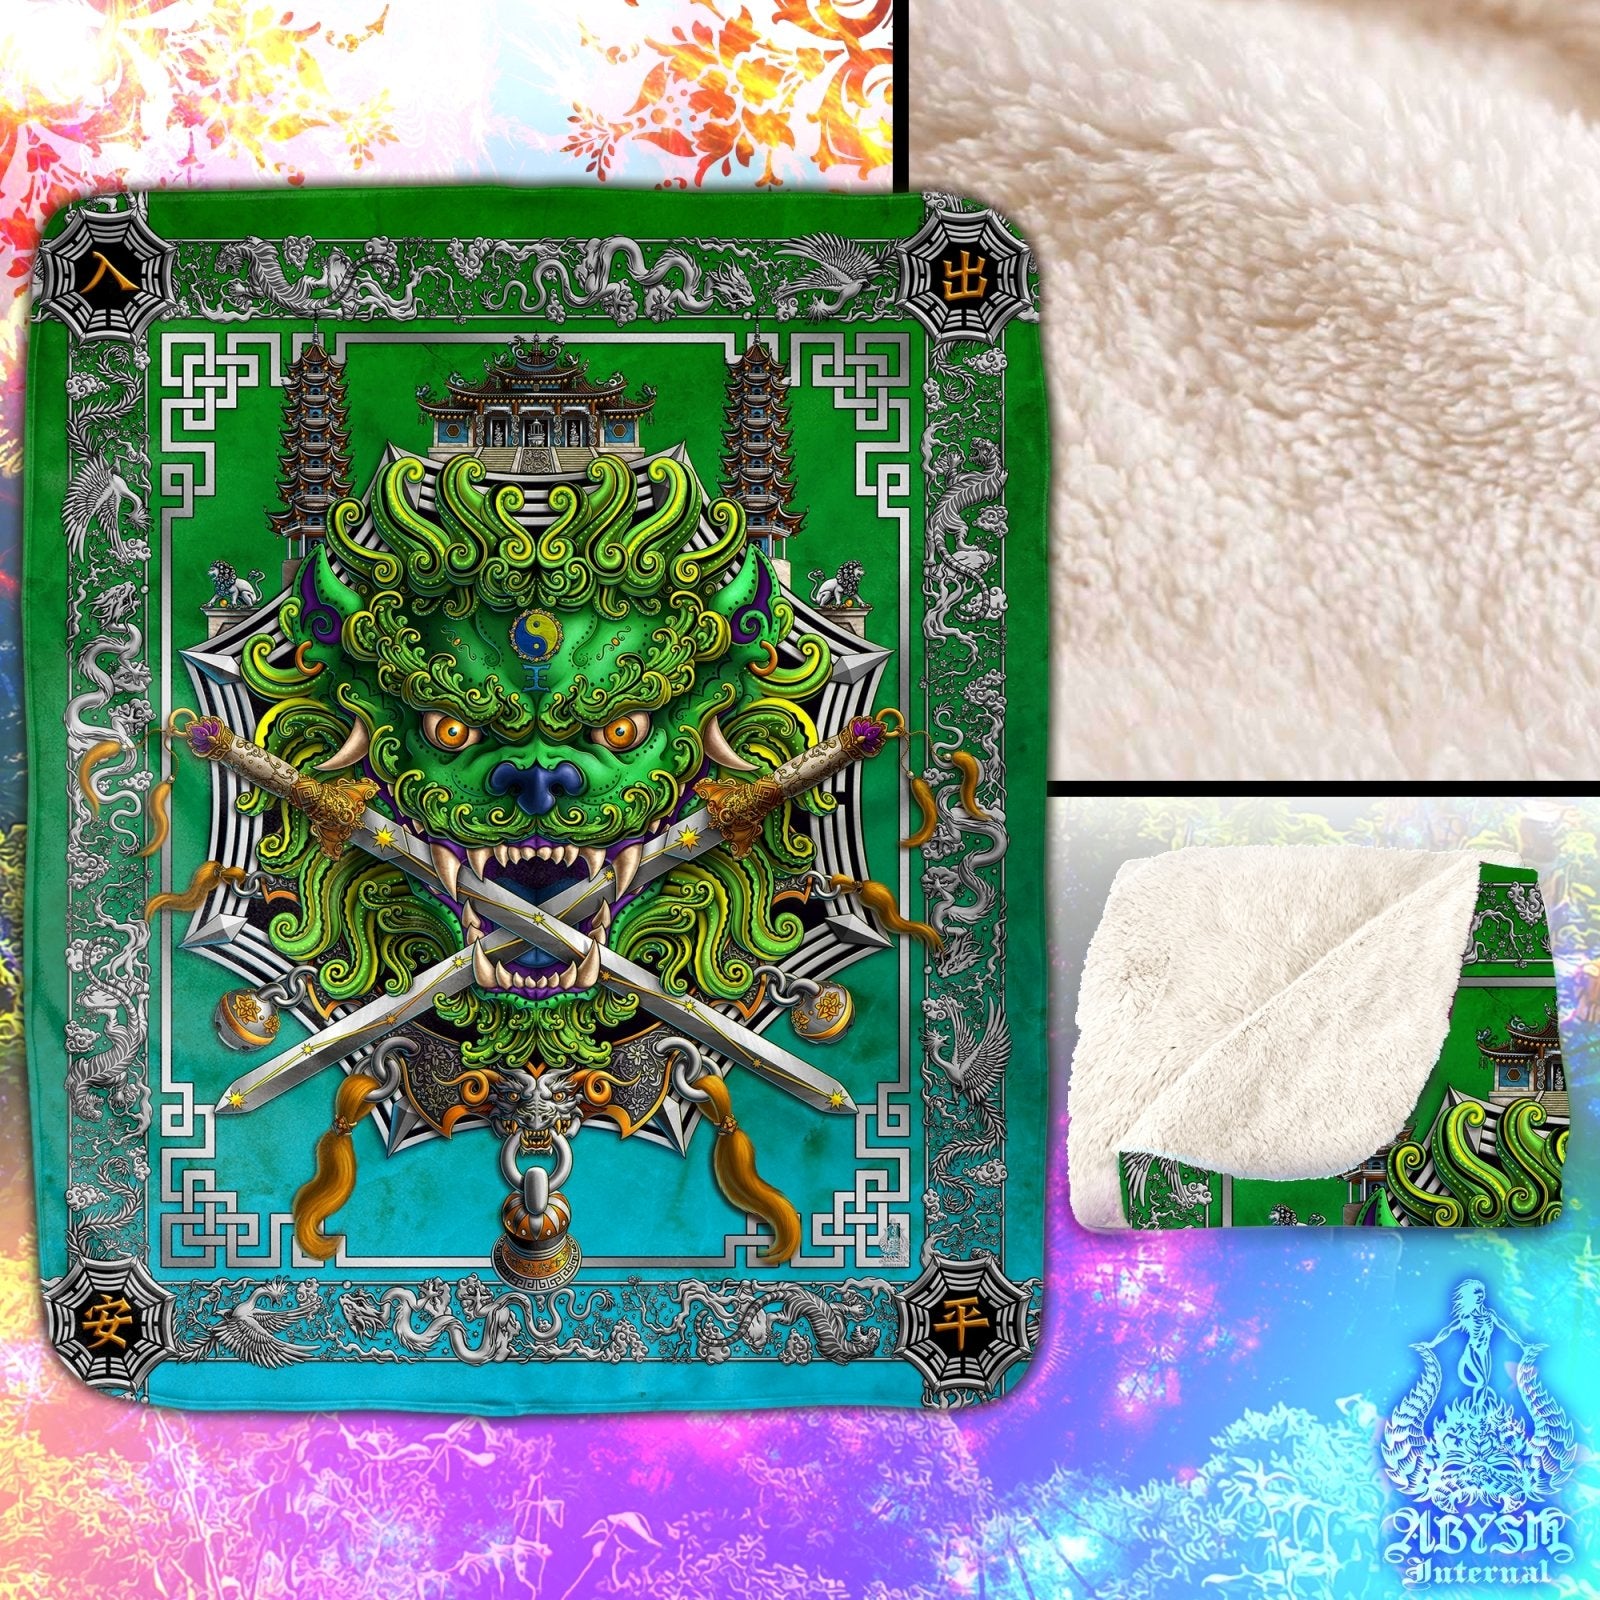 Asian Lion Throw Fleece Blanket, Taiwan Sword Lion, Chinese Art, Gamer Room Decor, Eclectic and Funky Gift - Green - Abysm Internal